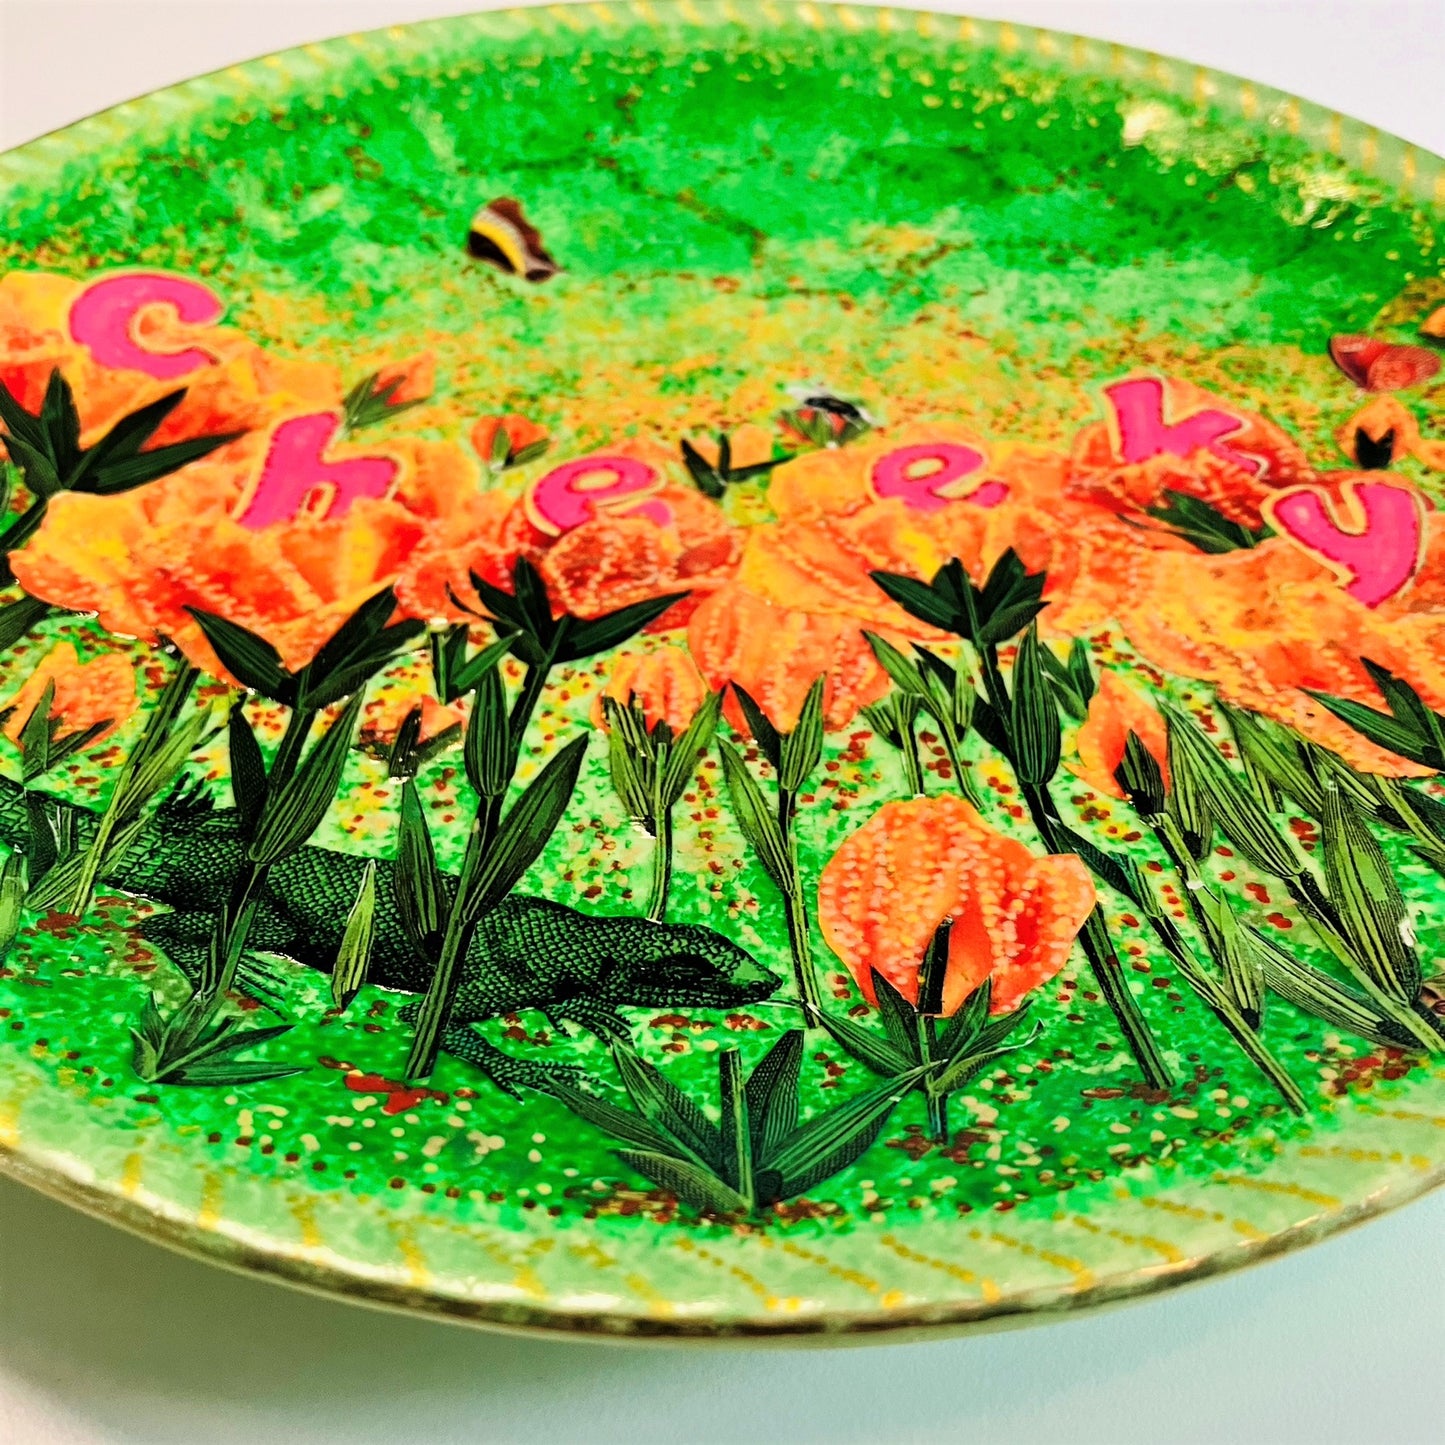 "Cheeky" Wall Plate by House of Frisson, featuring a collage with letters coming out of flowers forming the word "cheeky", and a lizard, on a green background. Closeup detail showing a lizard between the flowers.